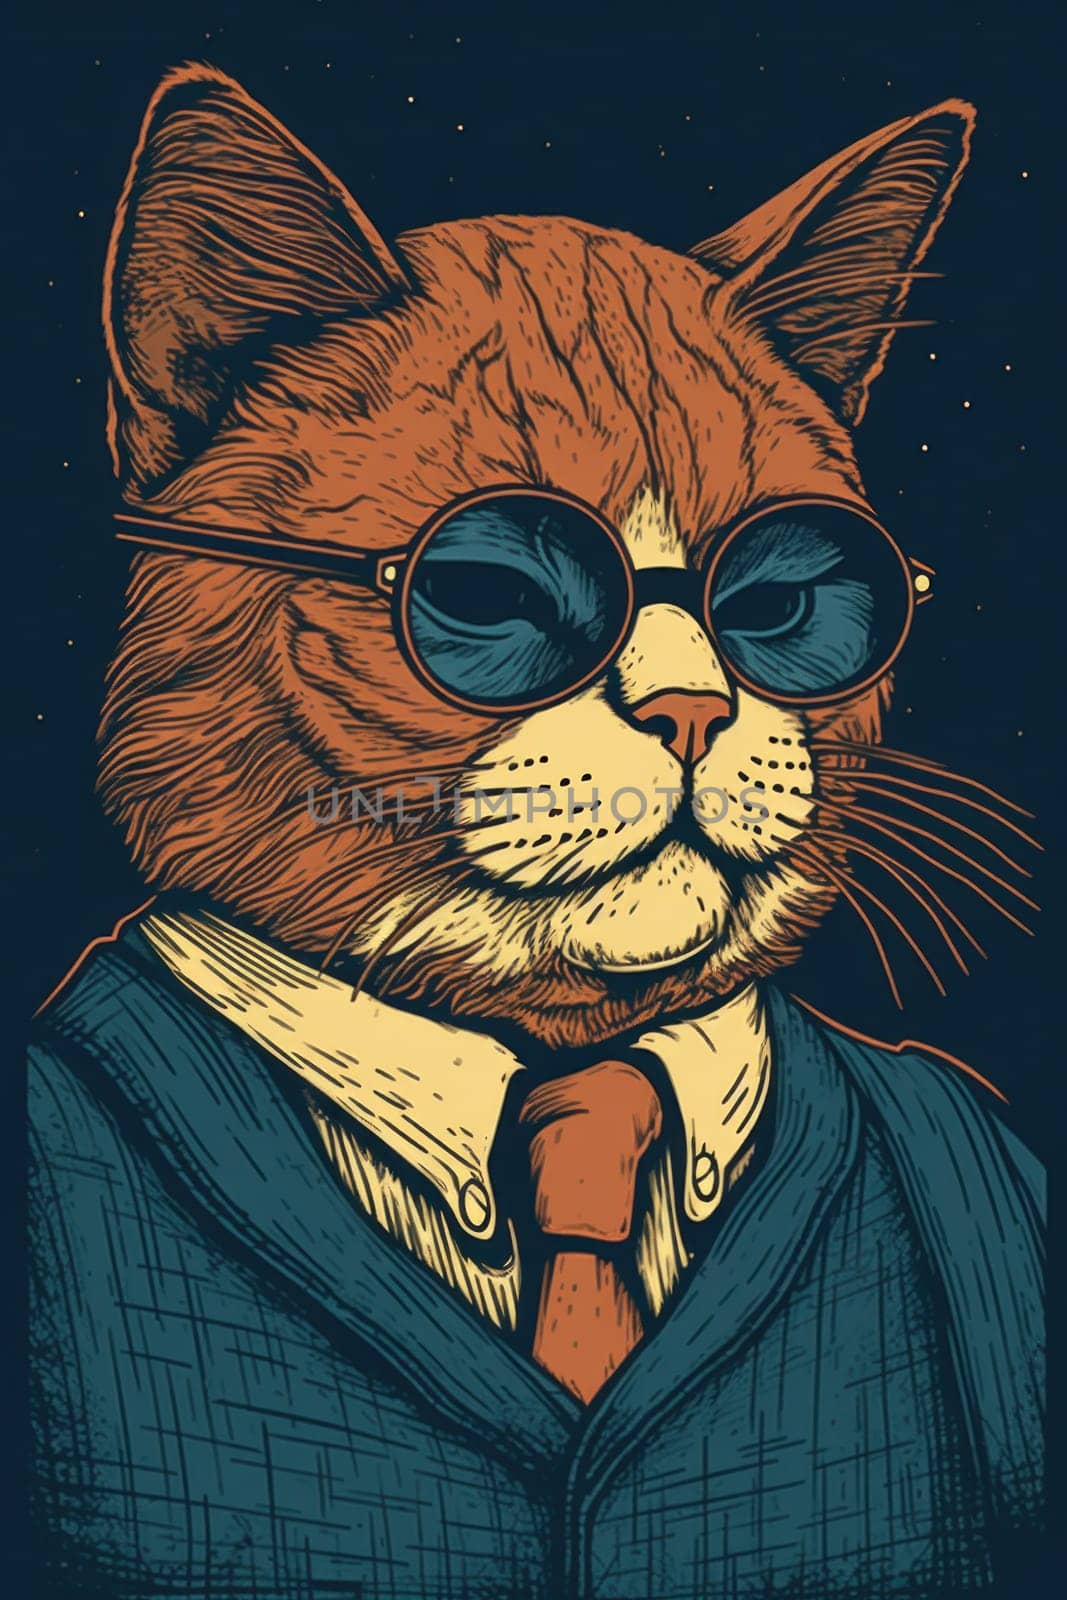 An orange cat wearing sunglasses and a suit